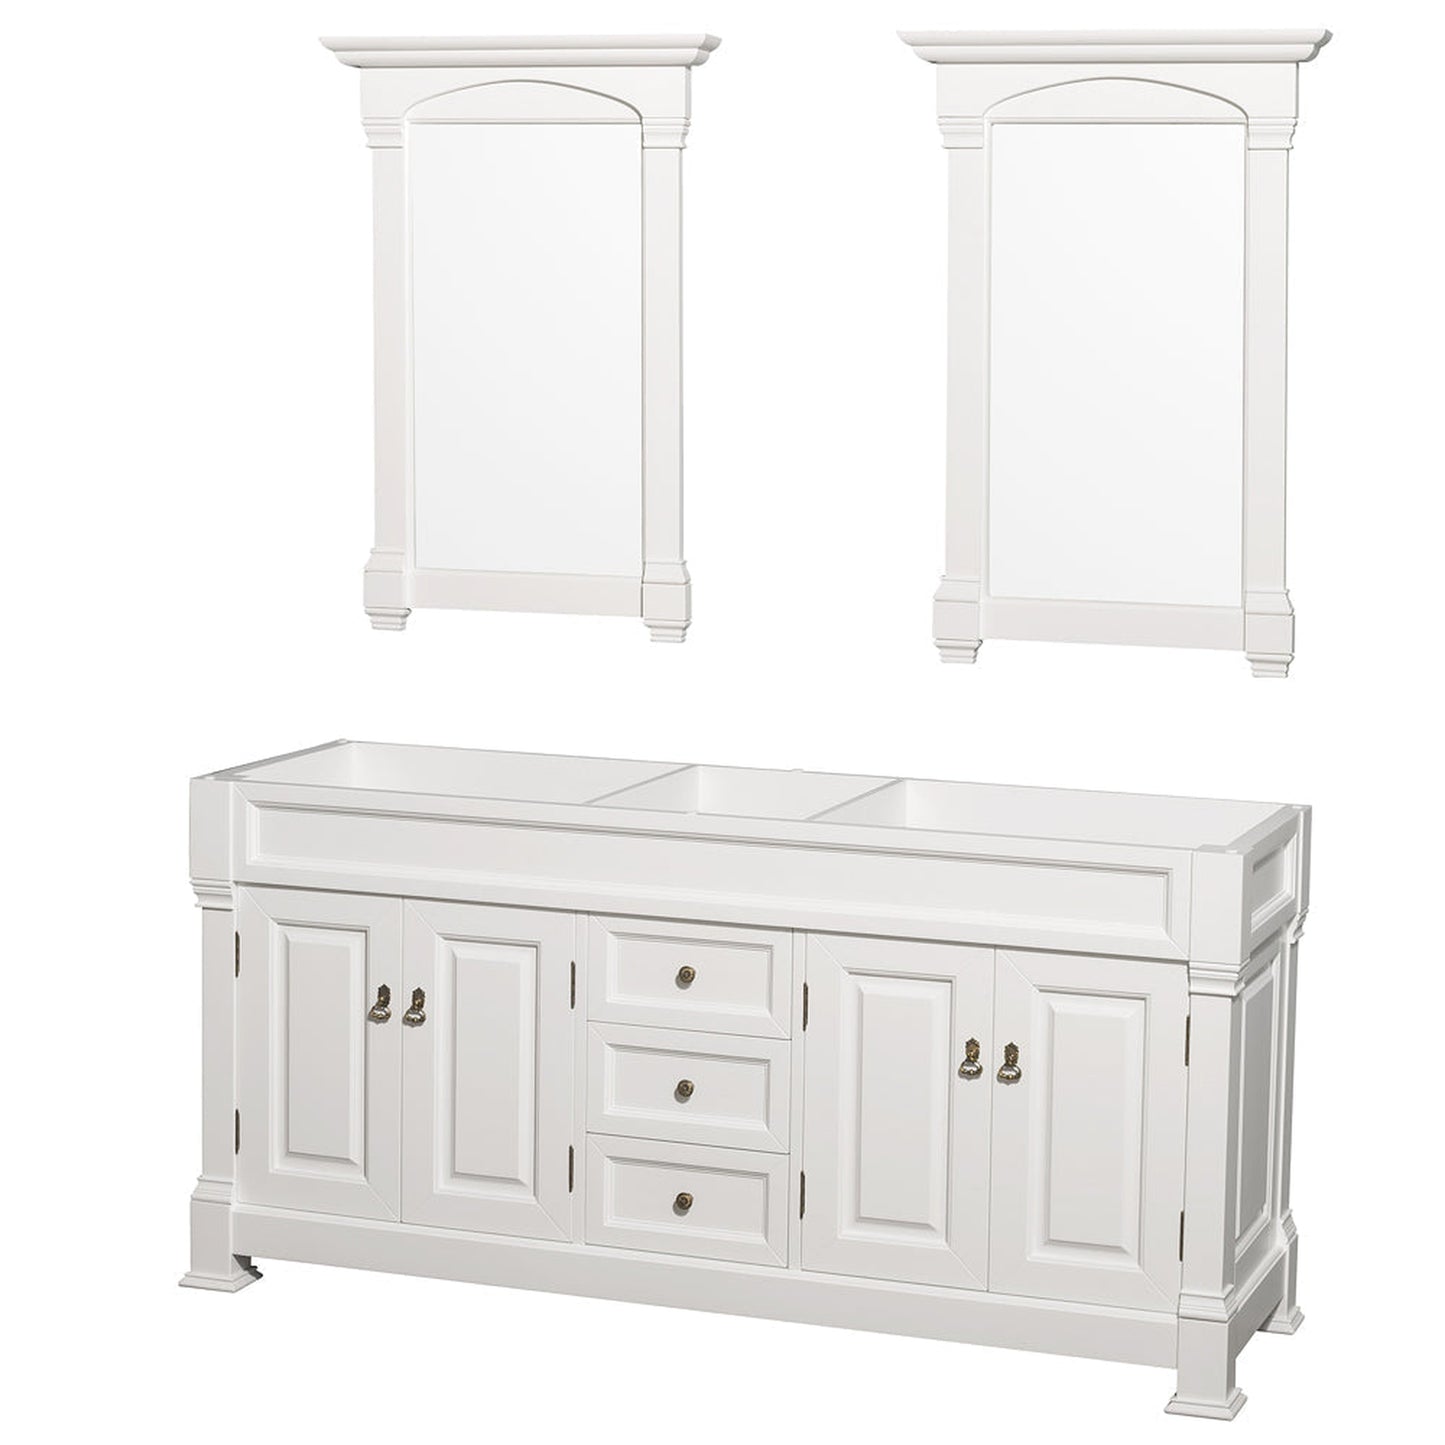 Wyndham Collection Andover 72" Double Bathroom Vanity in White With White Carrara Marble Countertop, Undermount Oval Sink & 28" Mirror